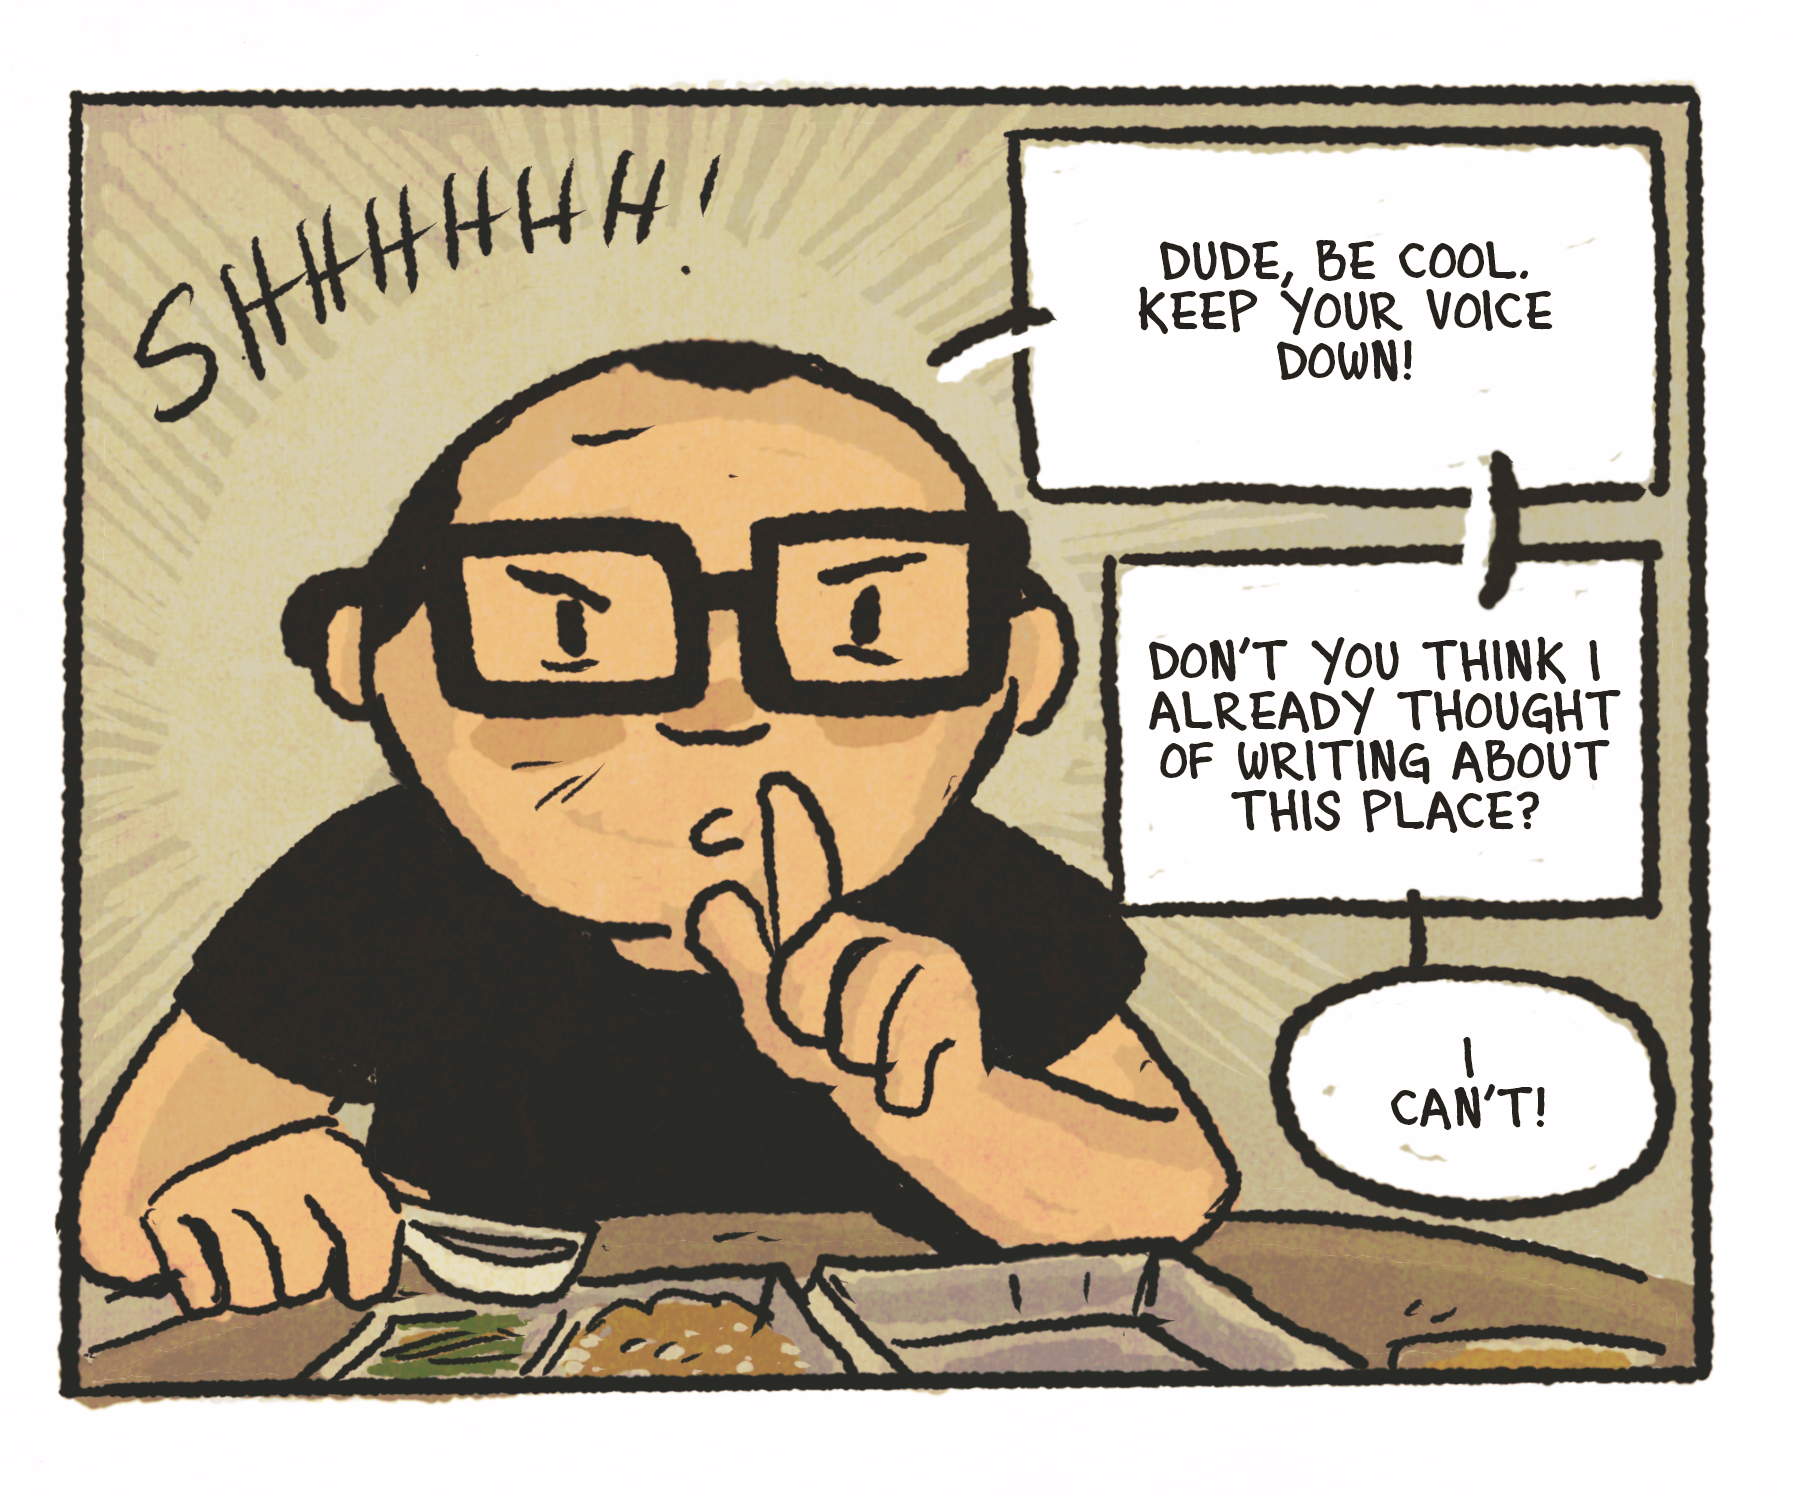 Comics panel: Balding man with glasses holds up his finger to his mouth and says "Shhh!" Speech bubbles read: "Dude, be cool. Keep your voice down!" "Don't you think I already thought of writing about this place?" "I can't!"